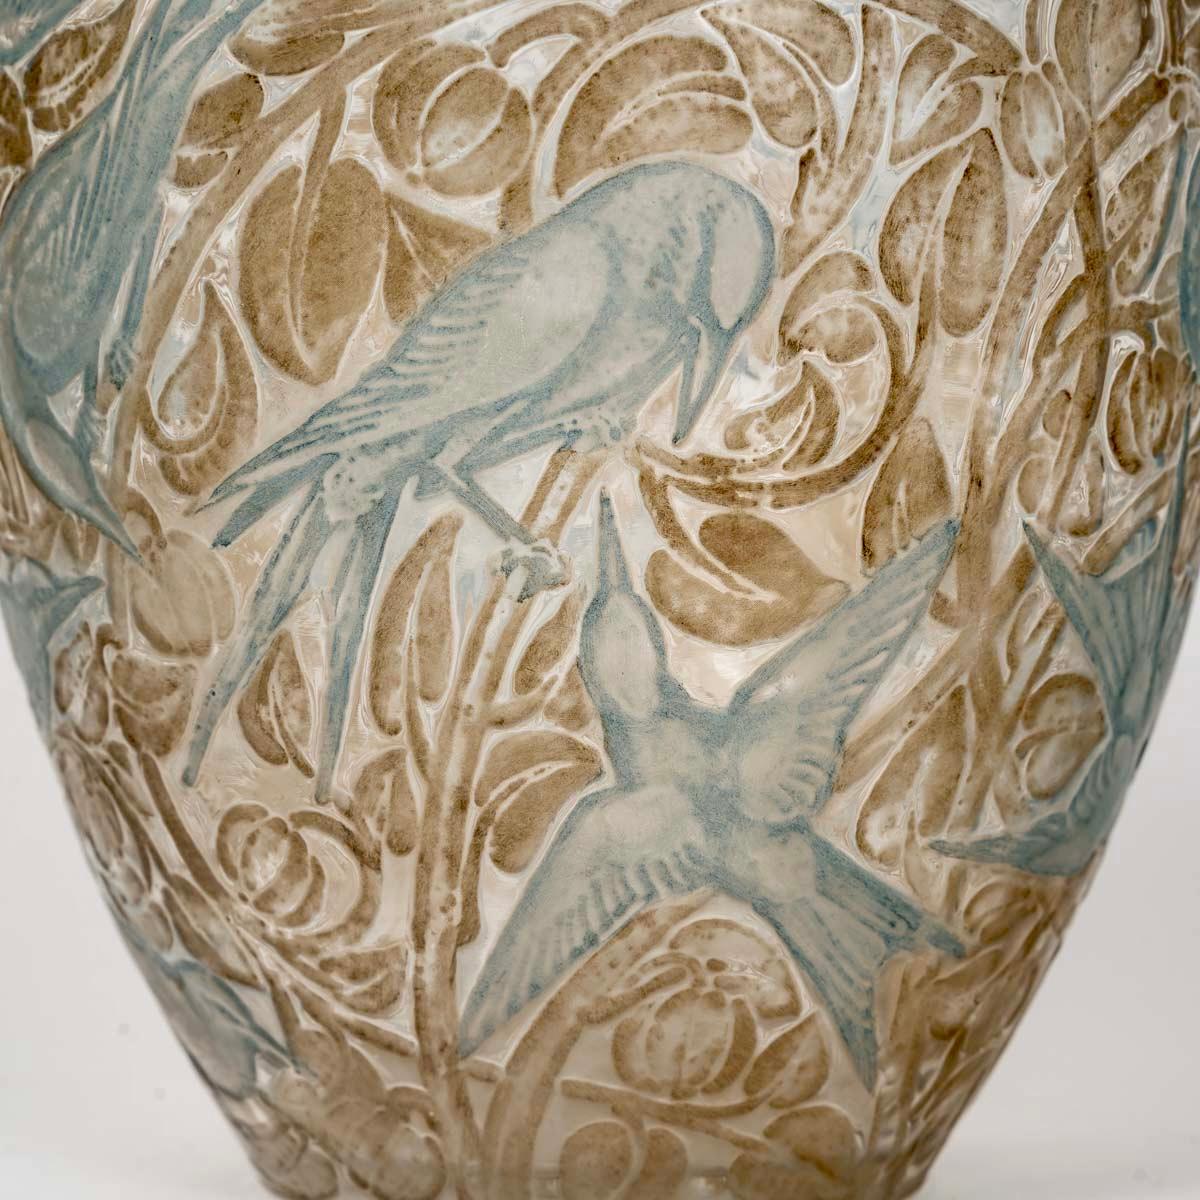 Art Deco 1923 Rene Lalique - Vase Martin Pecheurs Frosted Glass with Green & Sepia Patina For Sale